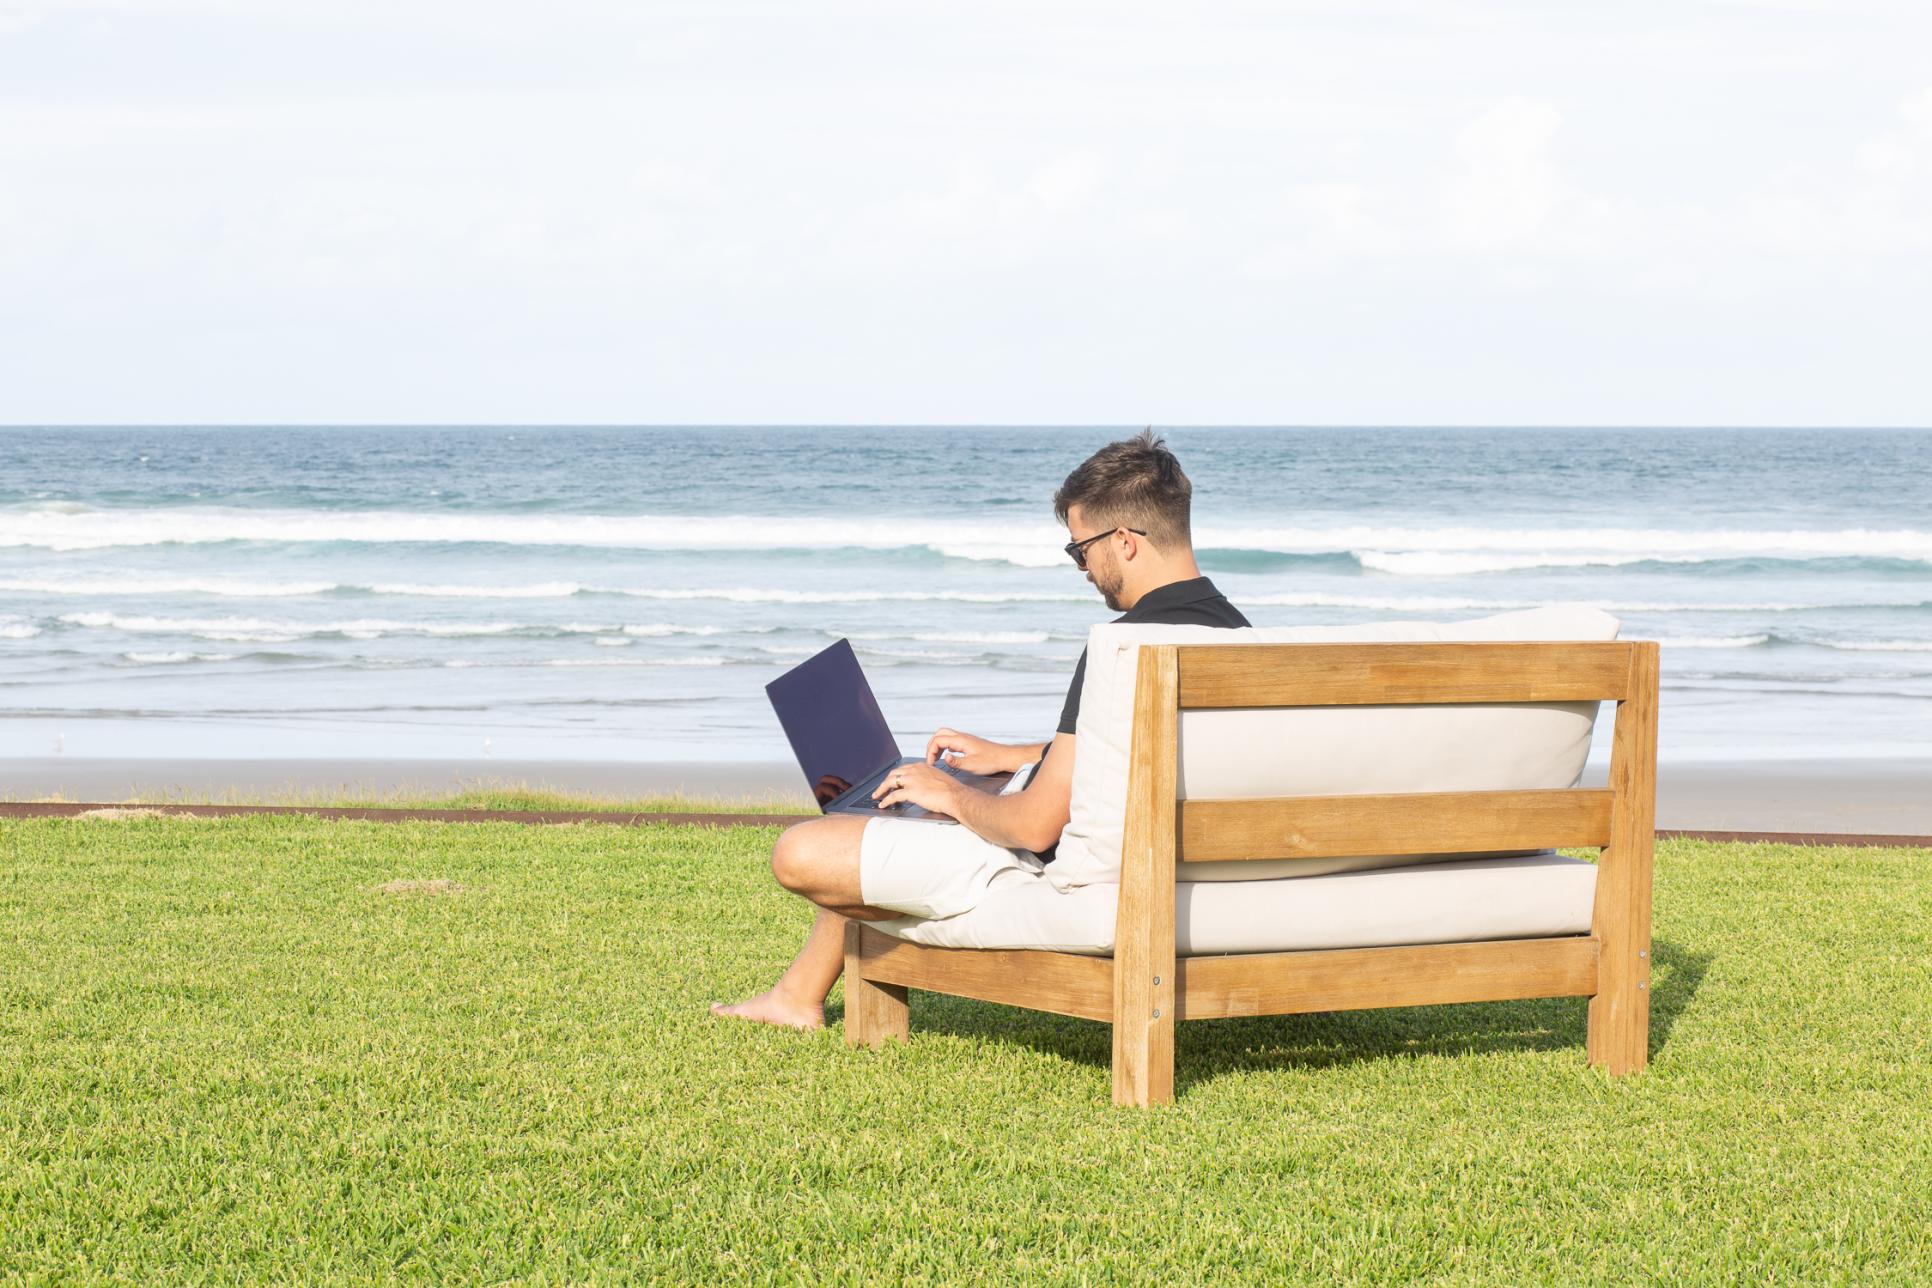 Developer working on a sofa outside with the ocean in the background